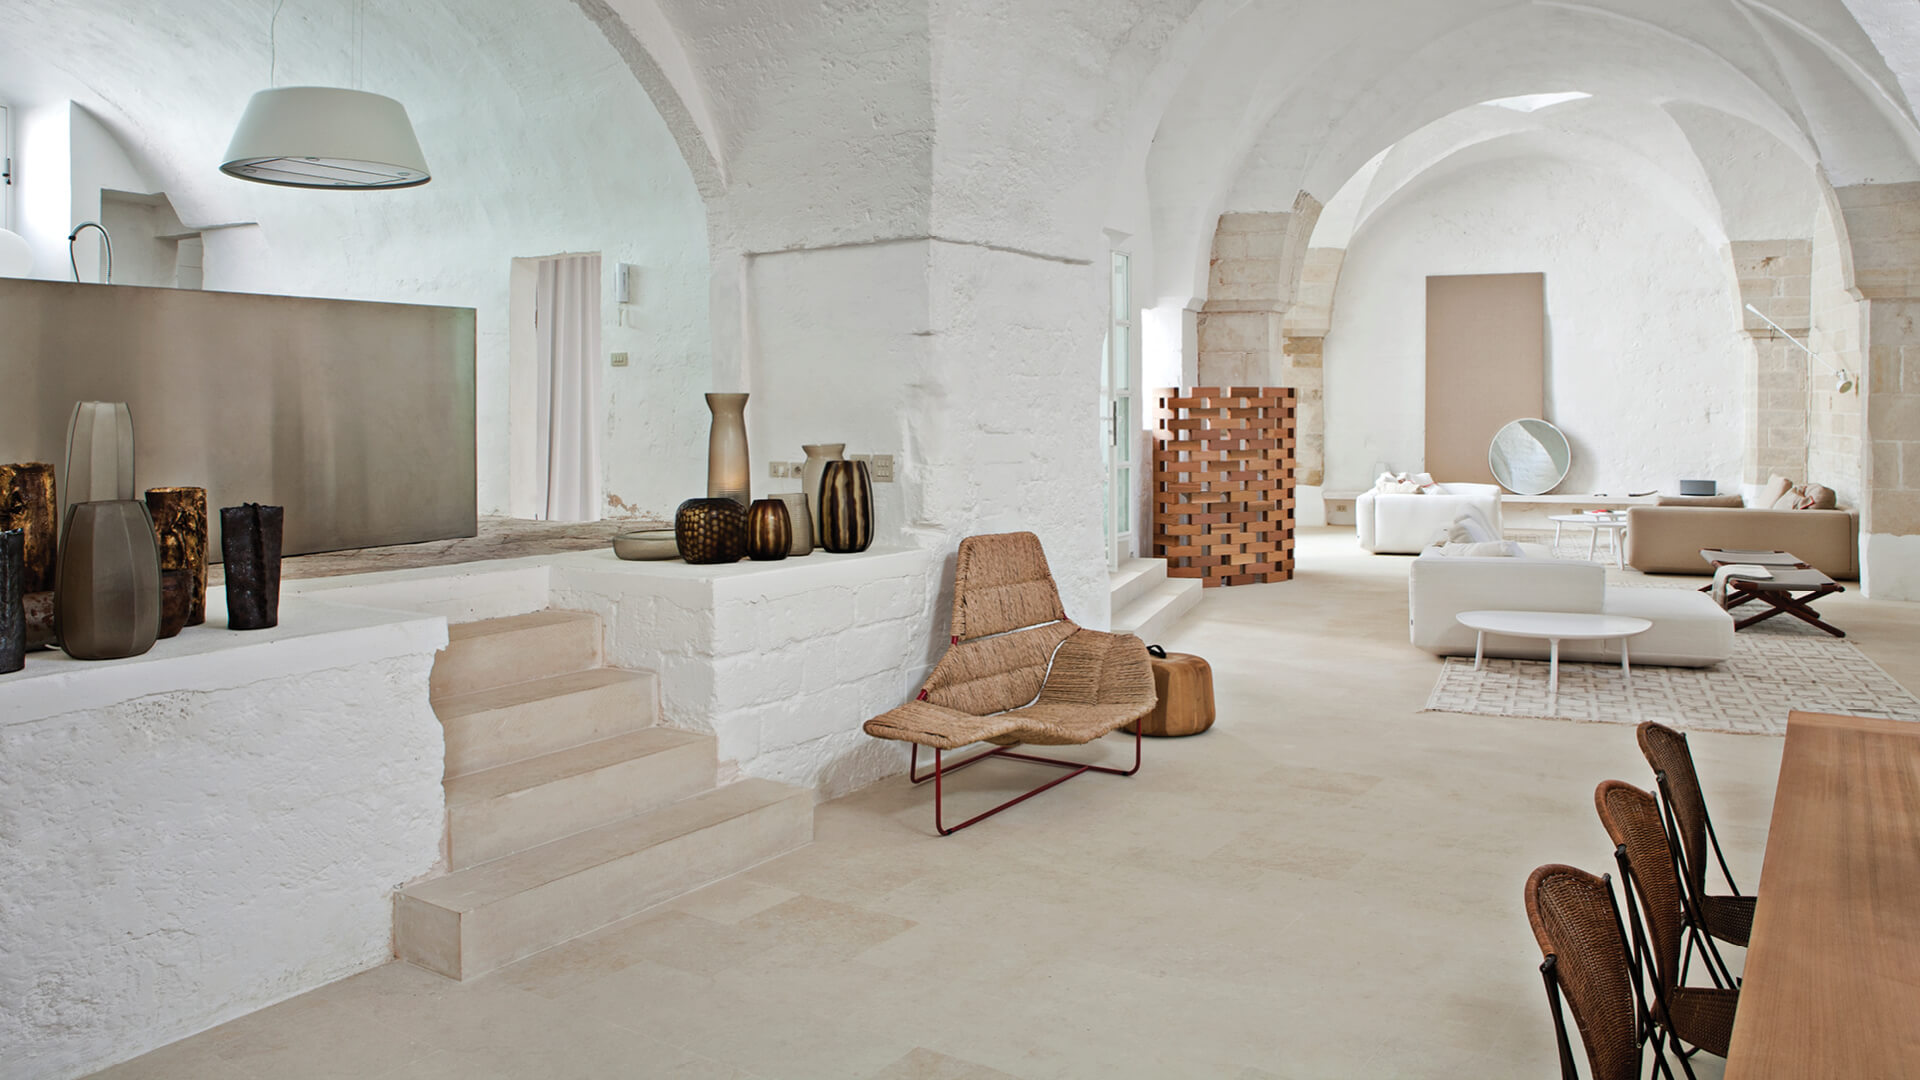 Palomba Serafini Associati crafts an Italian countryside home out of a former oil mill